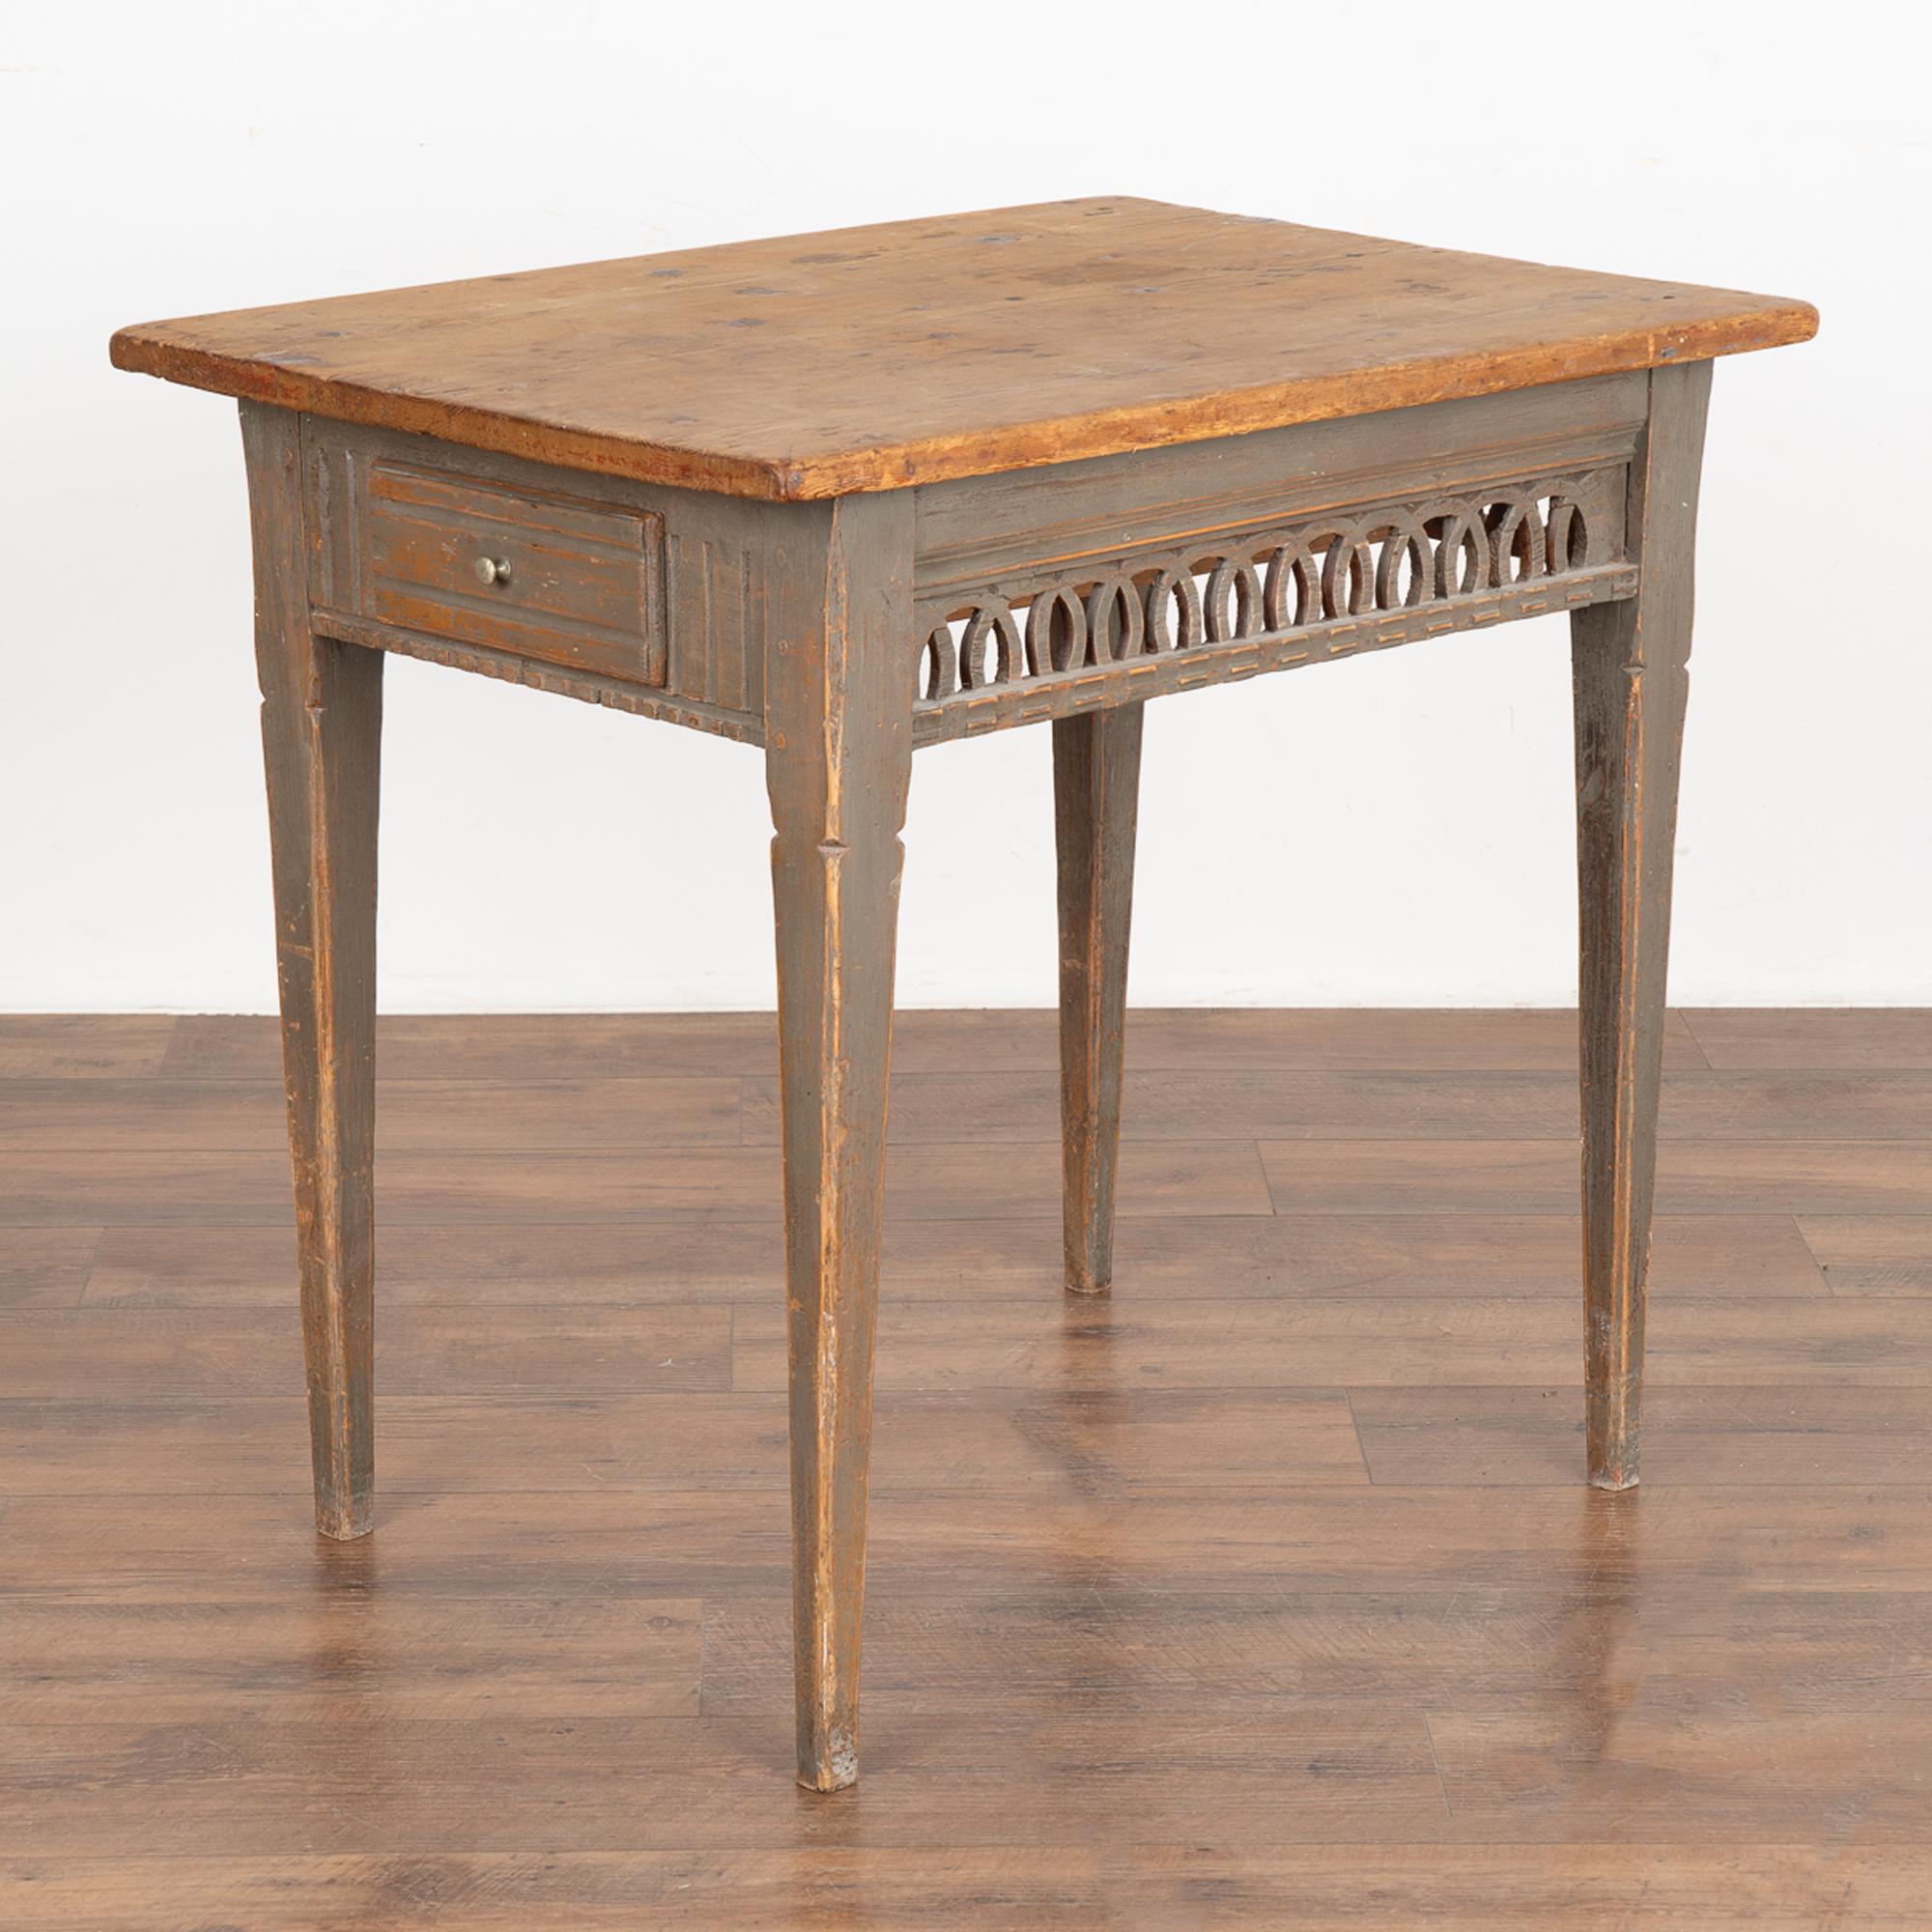 Small side table with decorative lattice work skirt and single drawer on side. 
The aged original gray painted finish is distressed through generations of use and has developed a warm and inviting patina. 
The contrasting pine top with its stains,